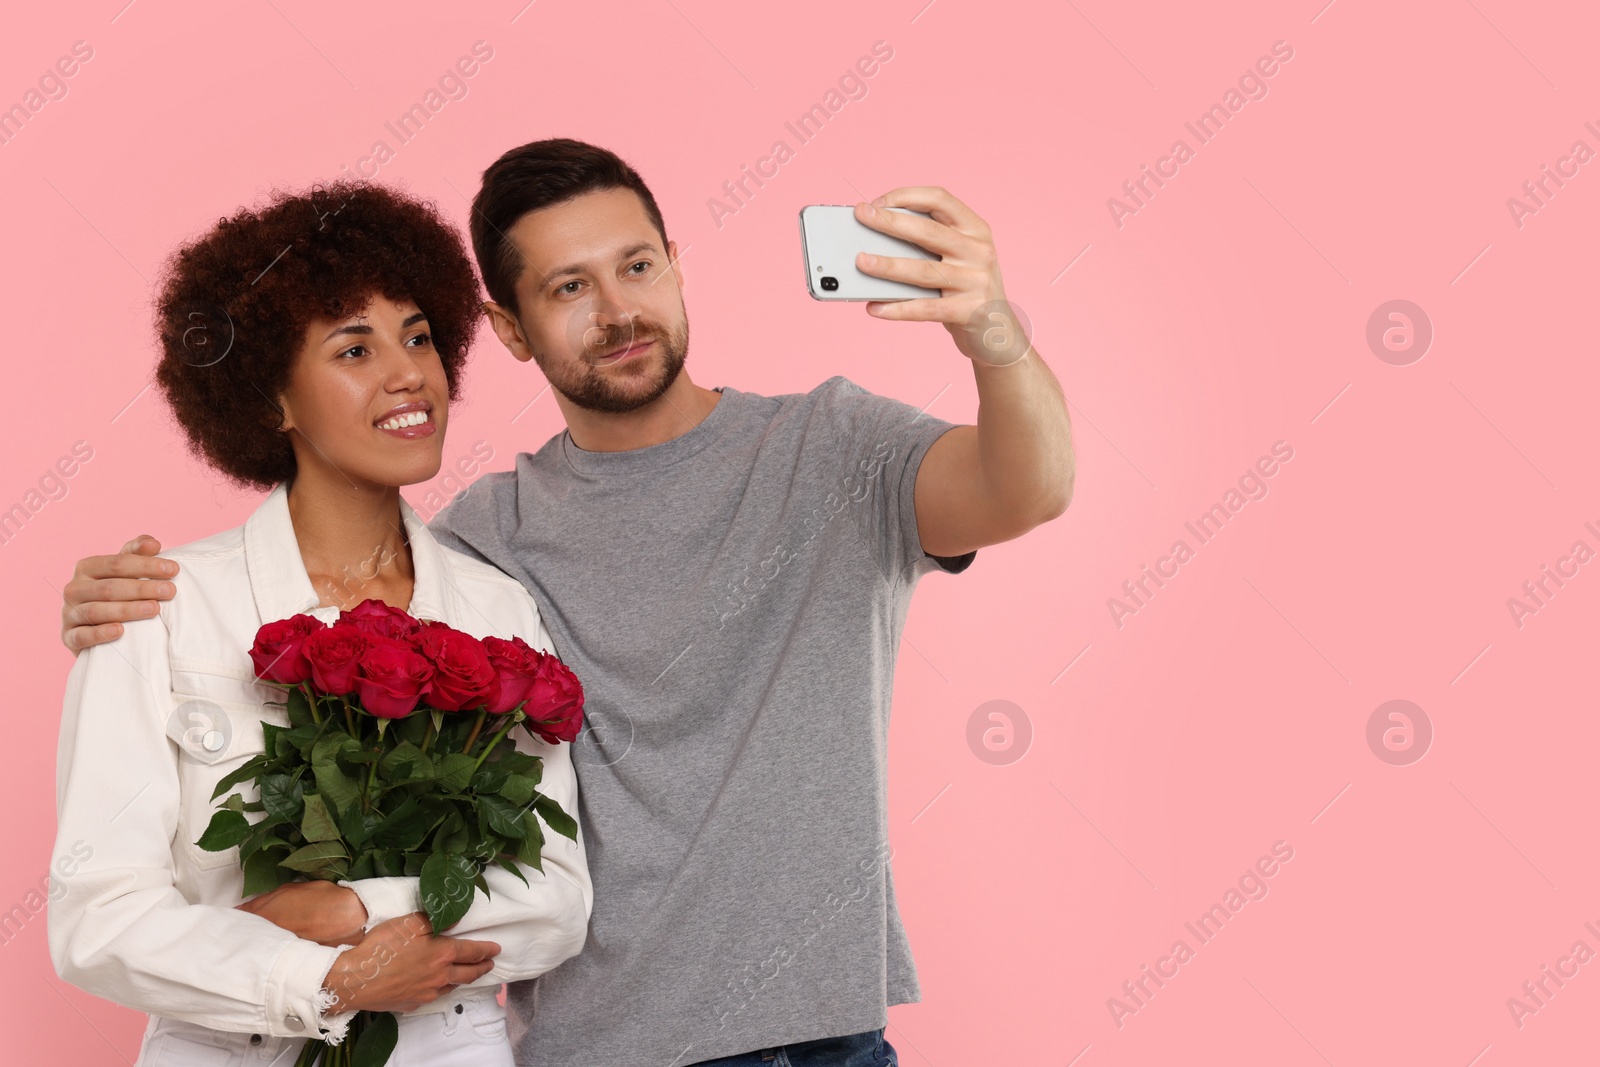 Photo of International dating. Happy couple taking selfie on pink background. Space for text